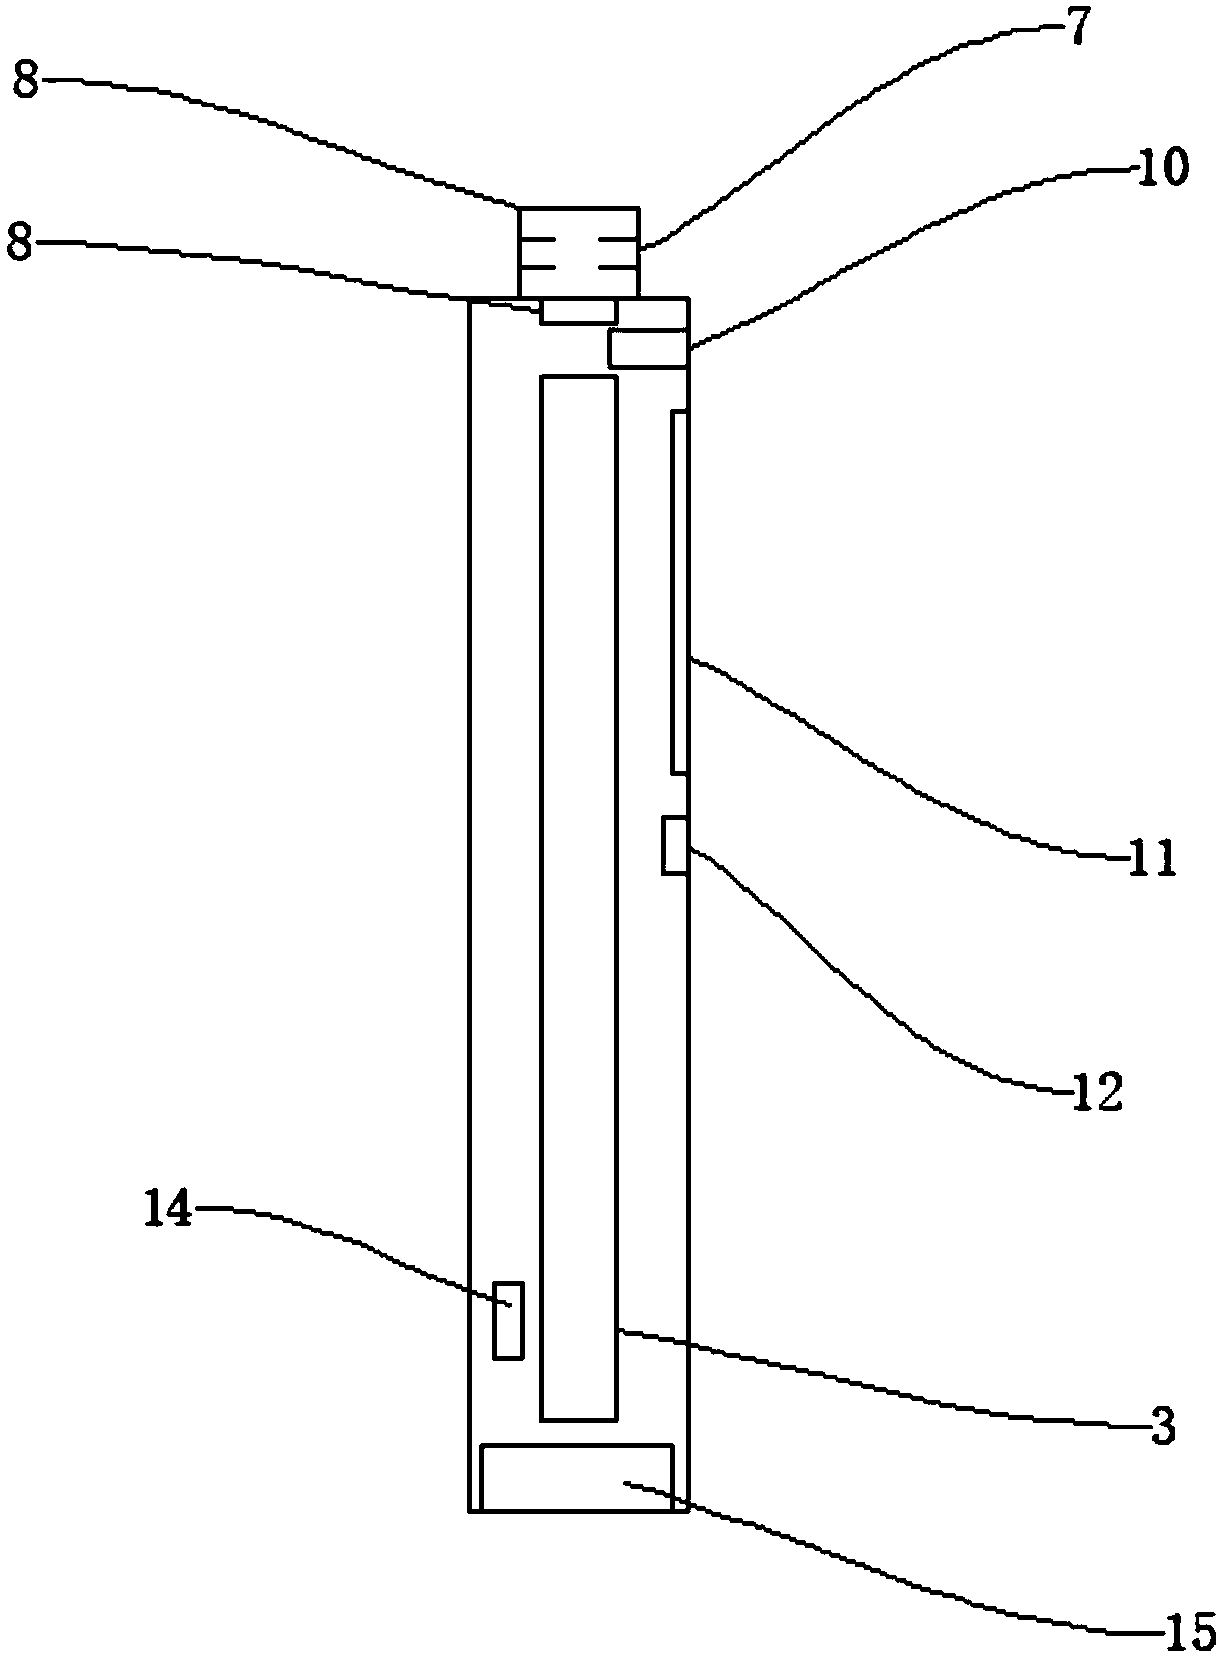 Decorative material detection device